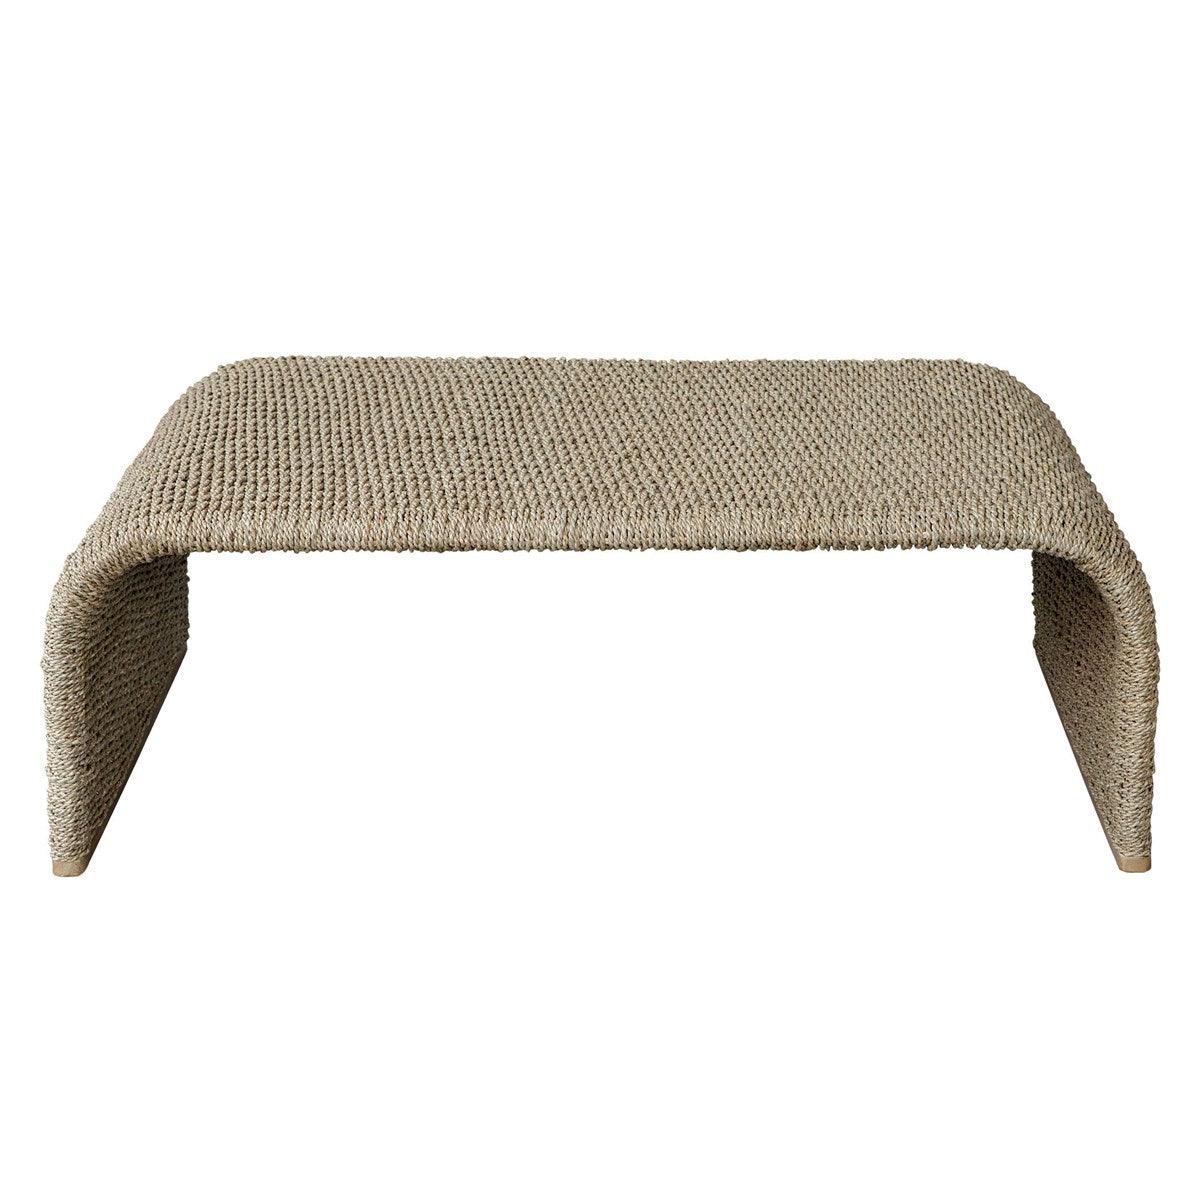 The Uttermost - Calabria Coffee Table - 22877 | Montreal Lighting & Hardware